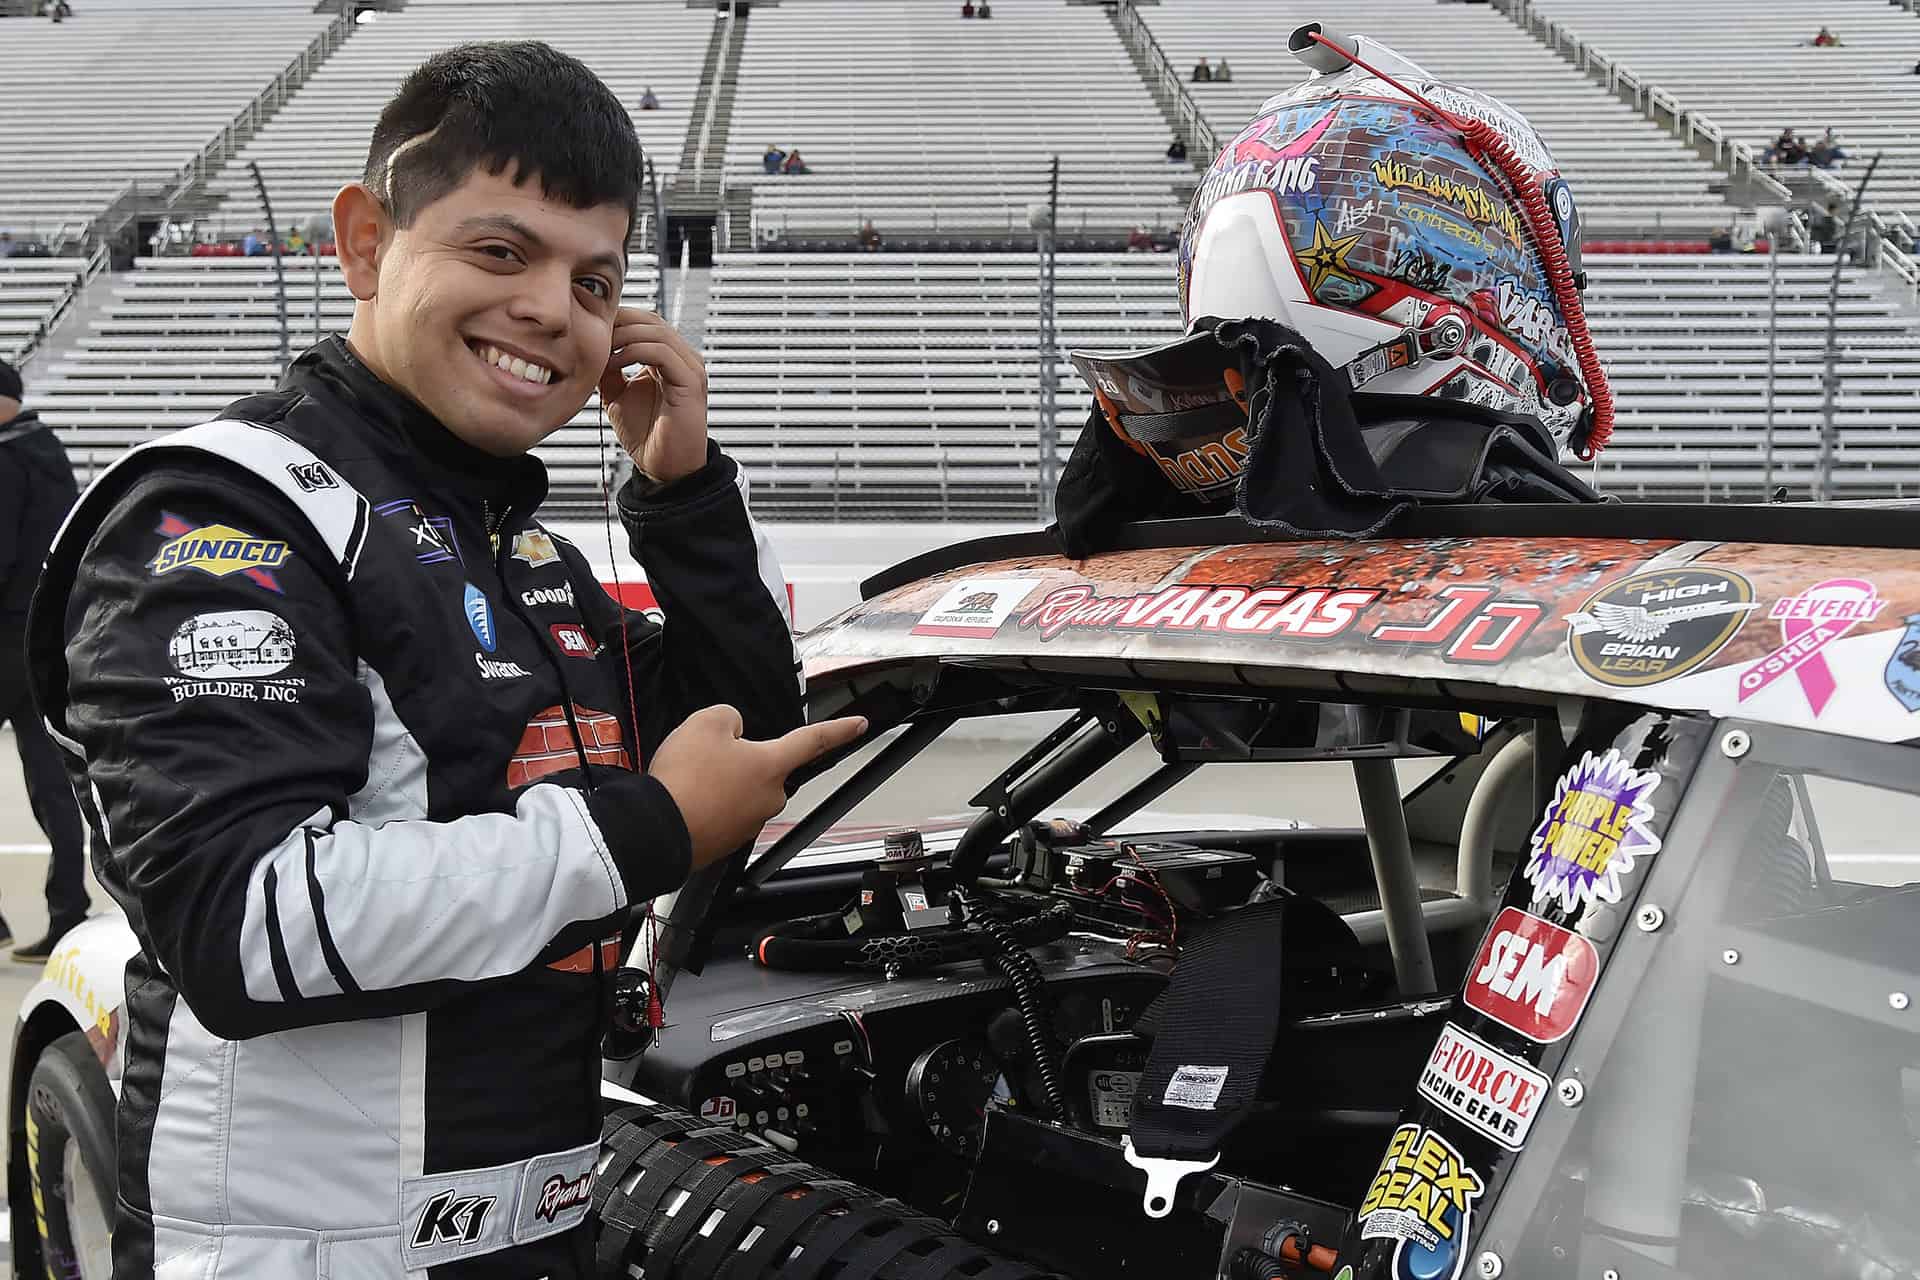 Ryan vargas parts ways with jd motorsports after his final nascar xfinity series race of the season.